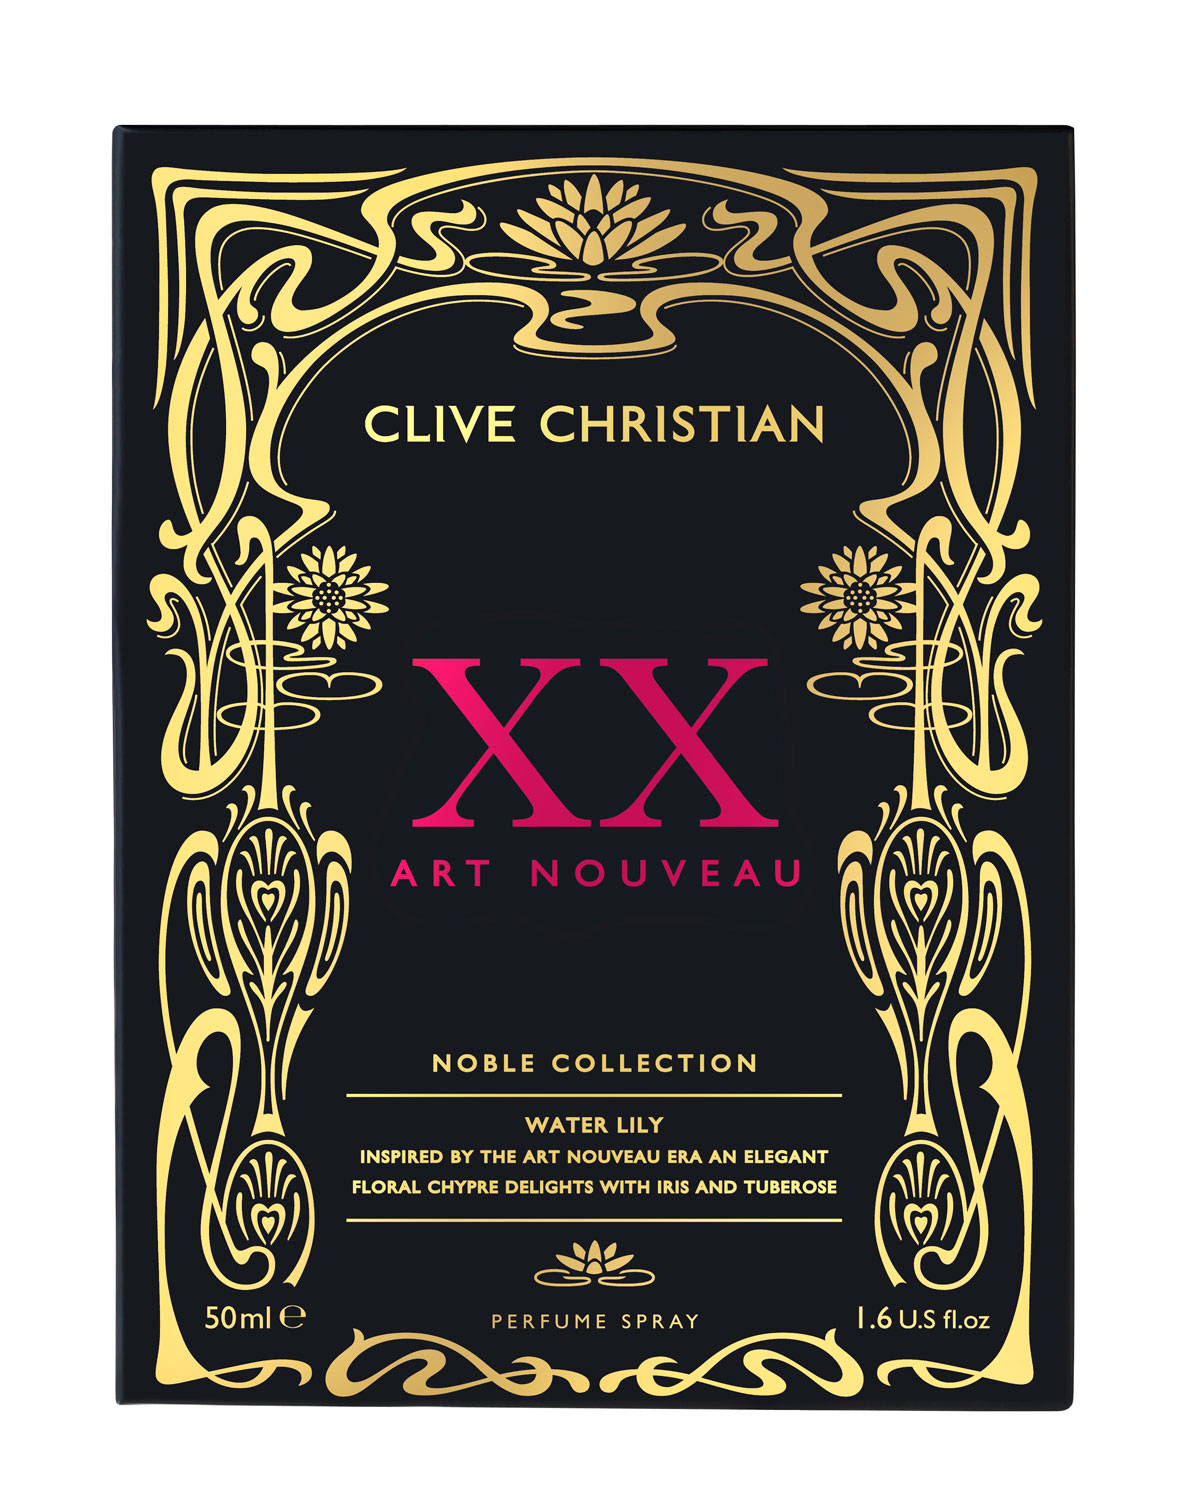 XX Art Nouveau Water Lily Clive Christian عطر - a جديد ...